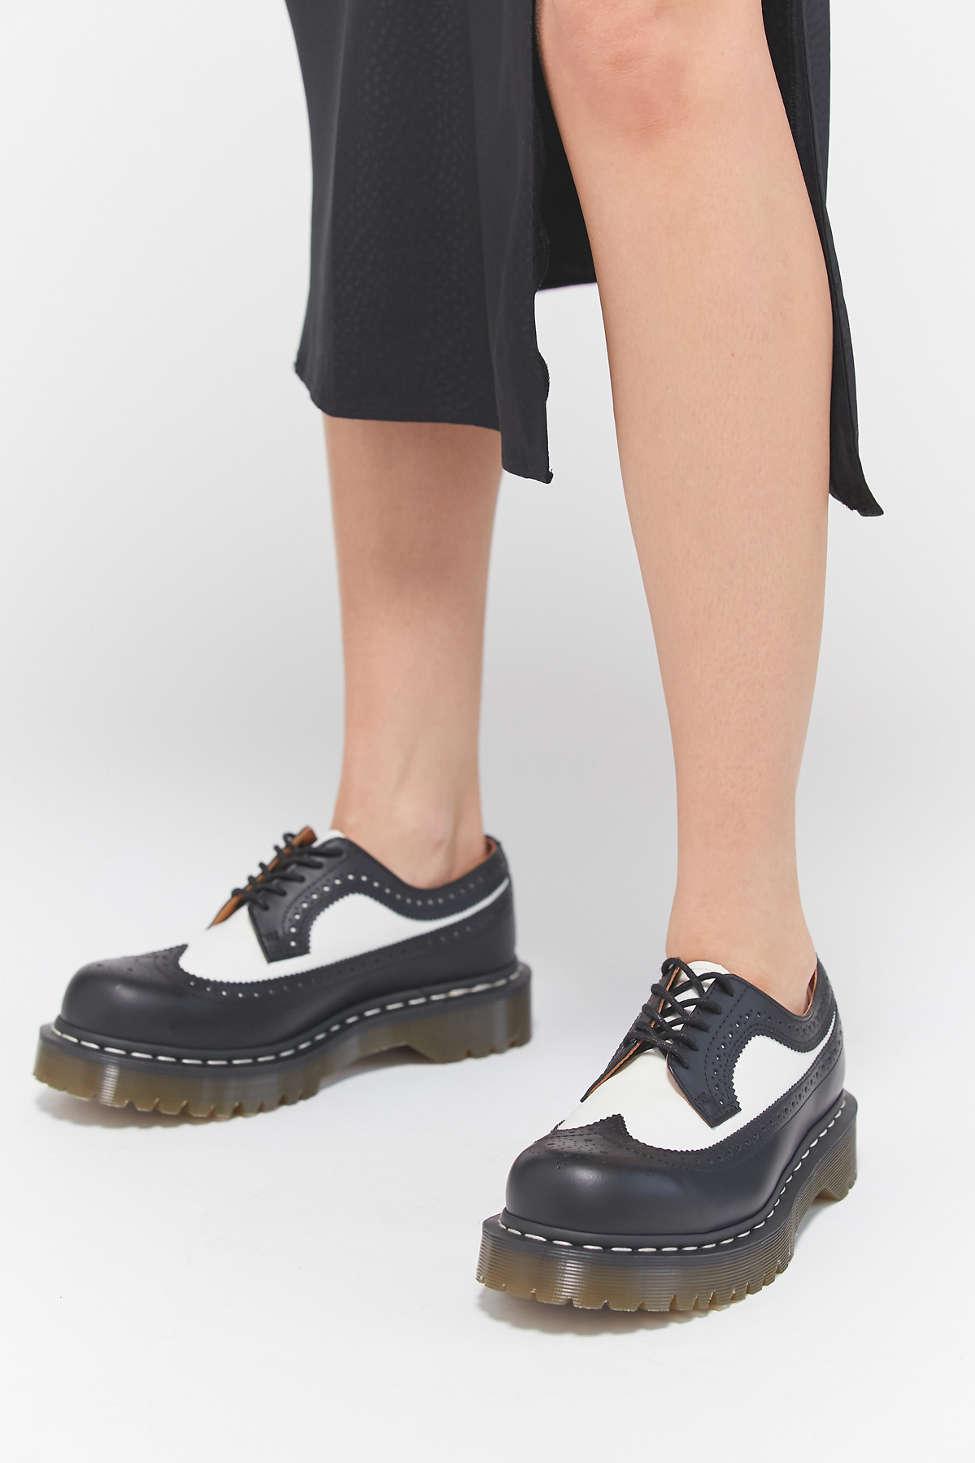 dr martens 3989 black stacked brogues